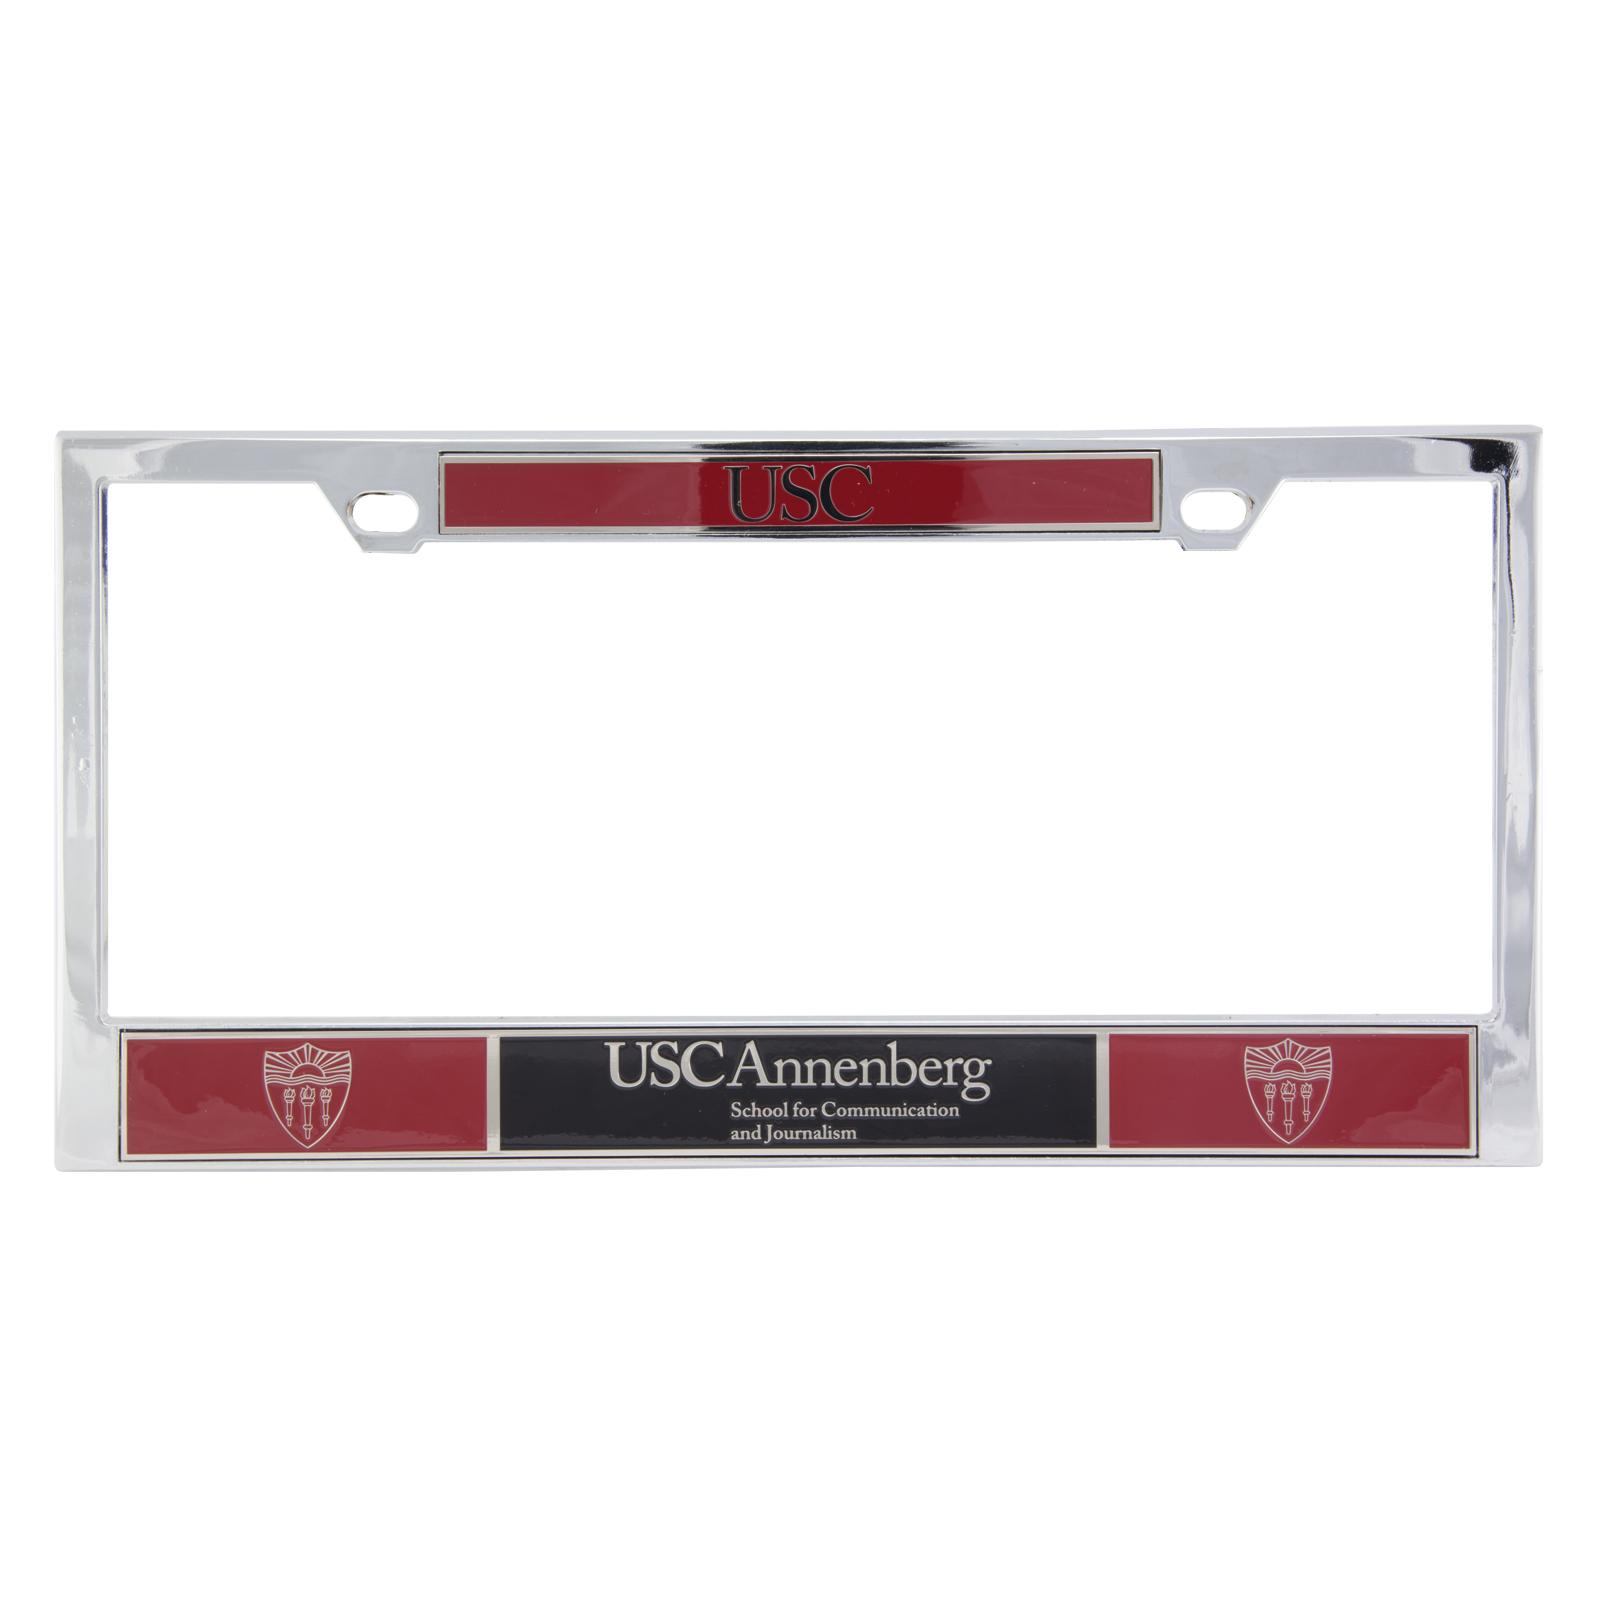 USC Shield Annenberg License Plate Frame Chrome by The U Apparel & Gifts image01